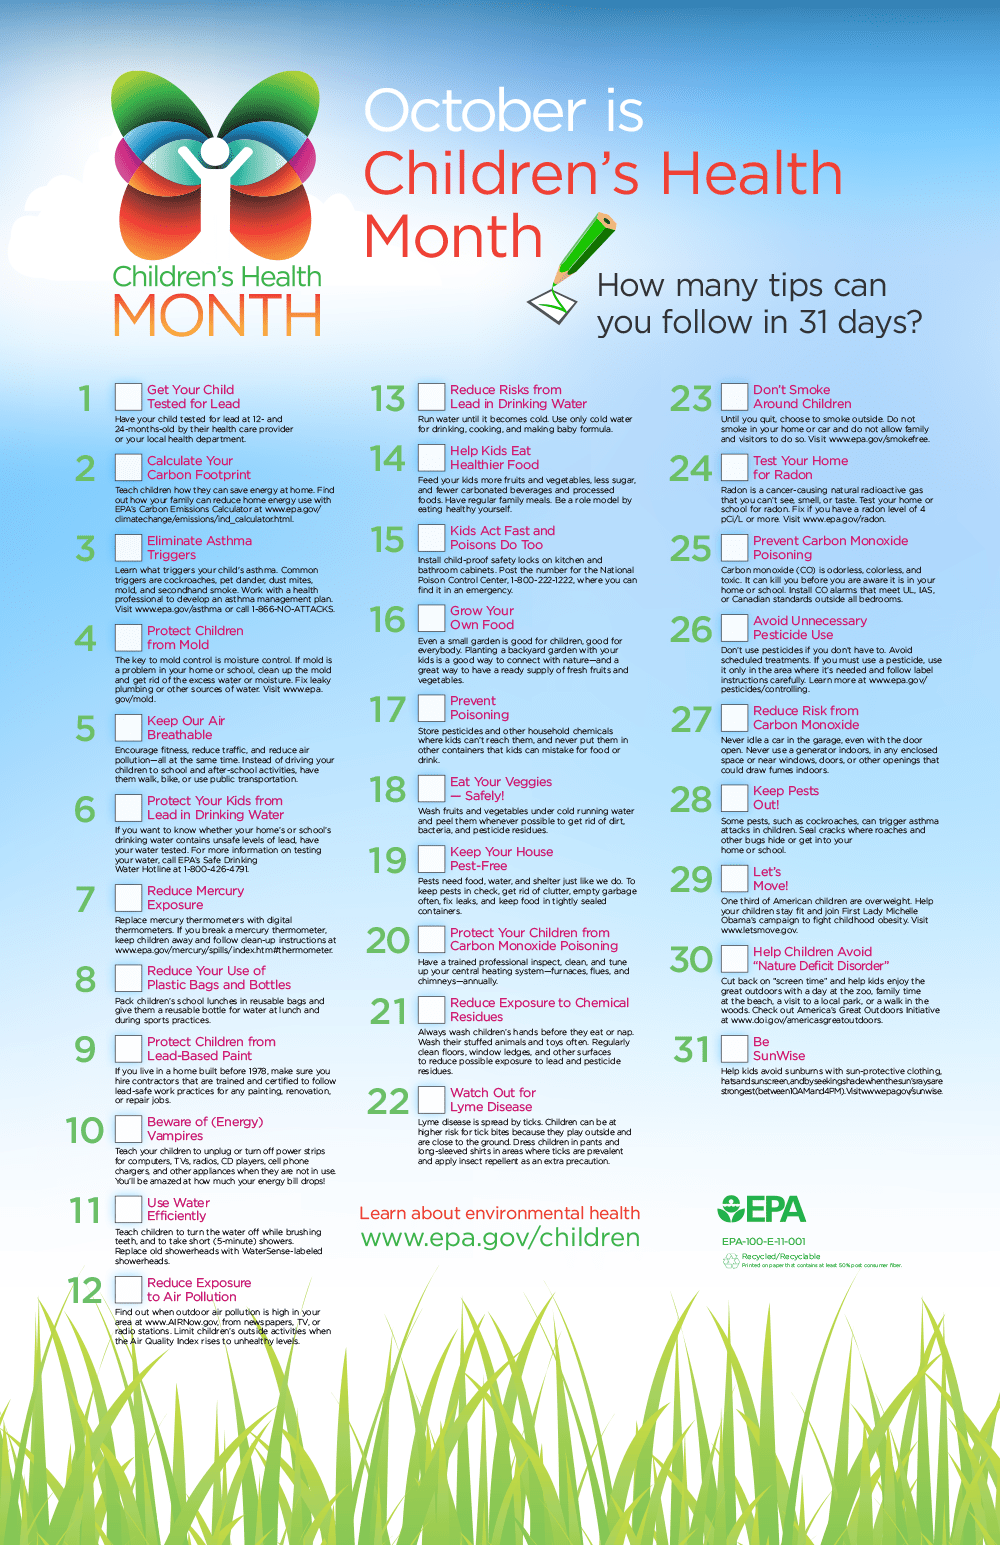 Click the image to download a poster from the EPA with a checklist of health tips.